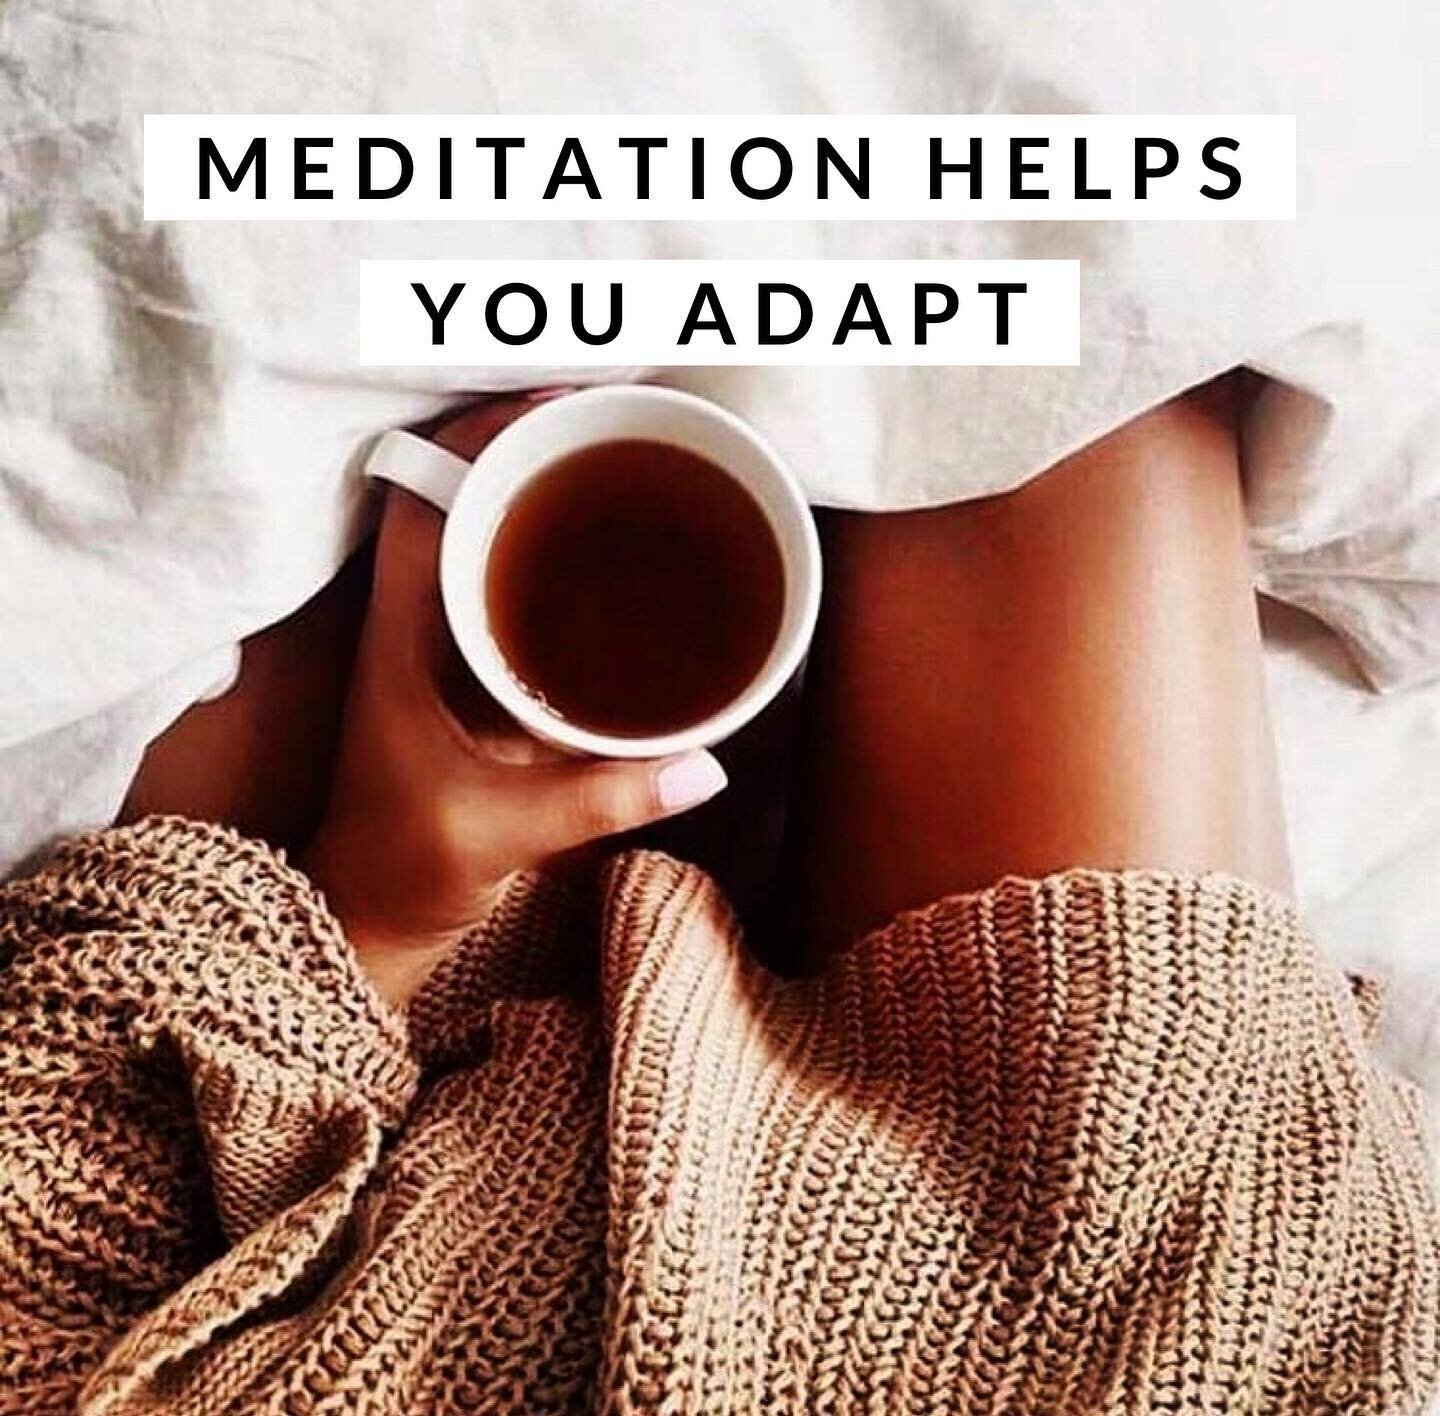 ✨Adaption -is the ability to adjust to new conditions✨.
.
So how does meditation help with this? You have a certain amount of stressors/ adaptation energy that allows you to go with the flow and handle little nuisances/changes. .
But any change in ex